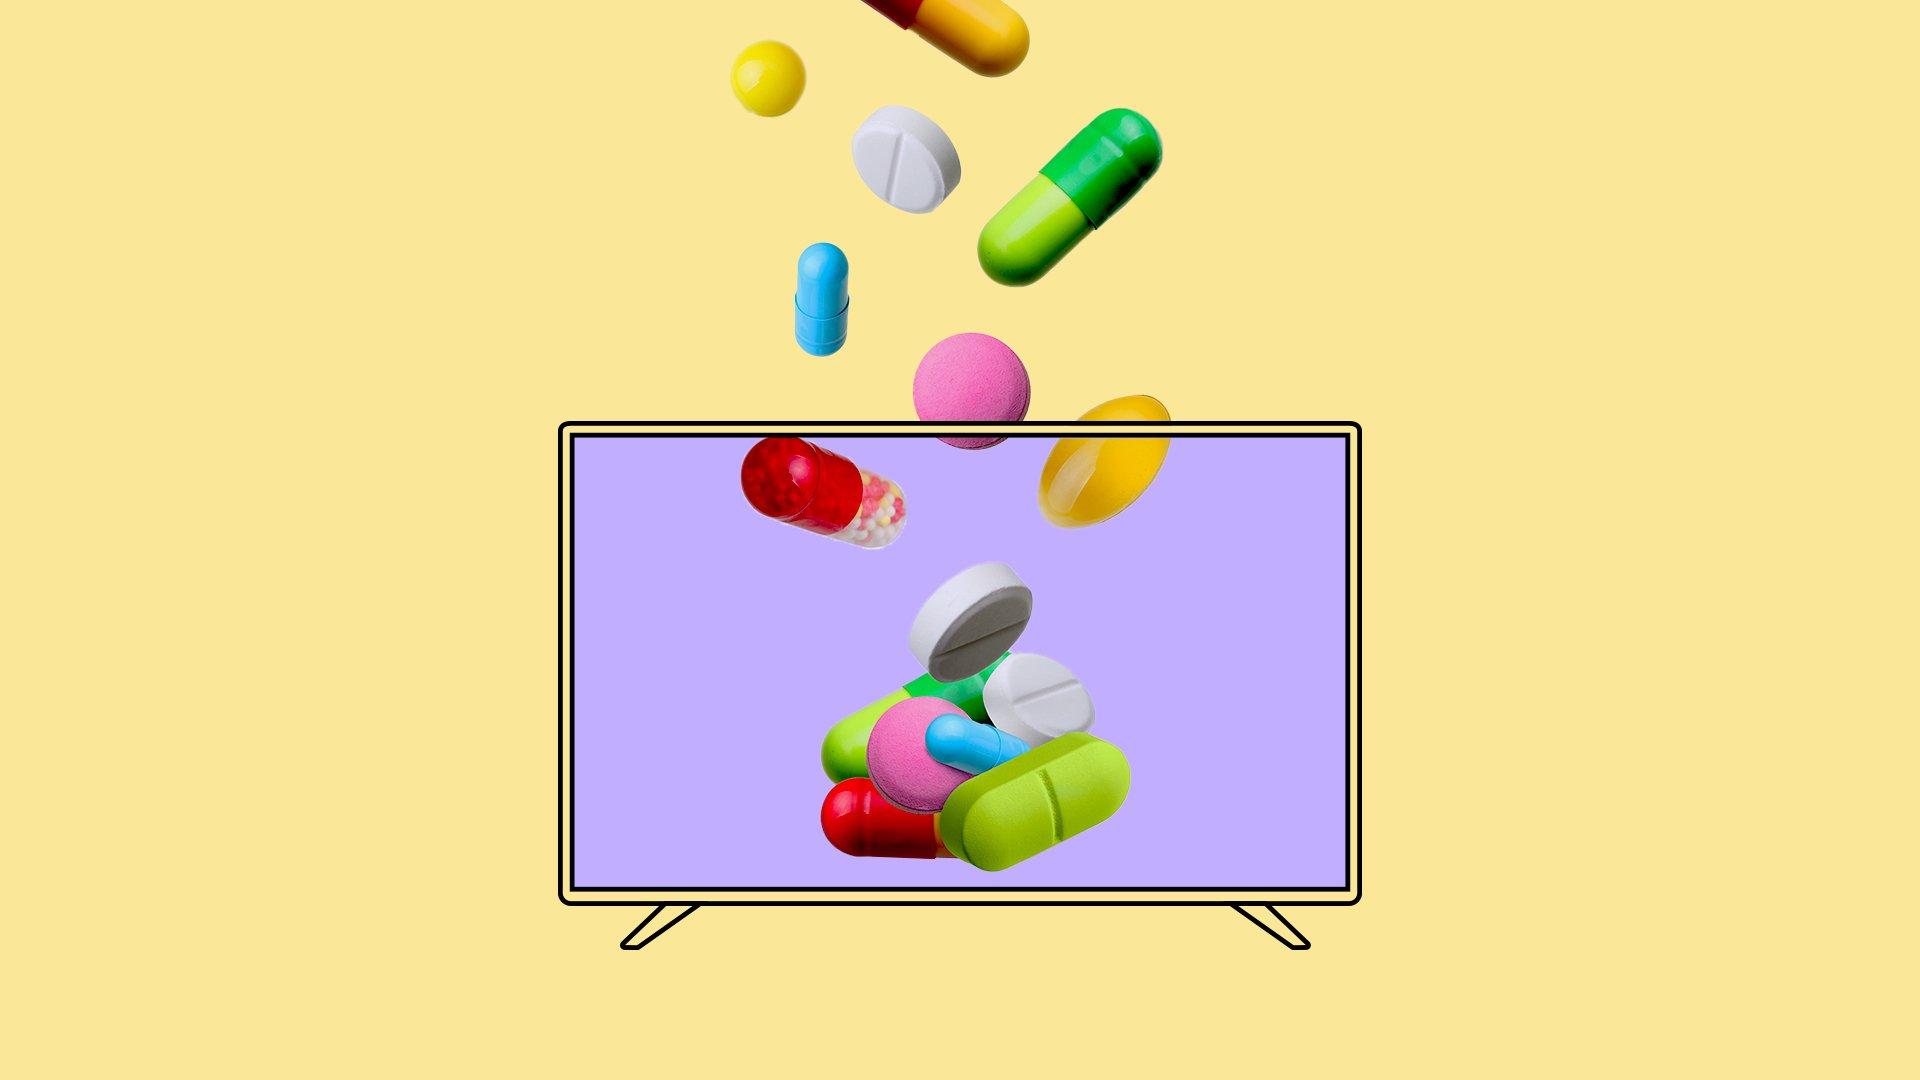 Graphic on a yellow solid background of color pulls falling inside an illustrated tv with a solid purple screen